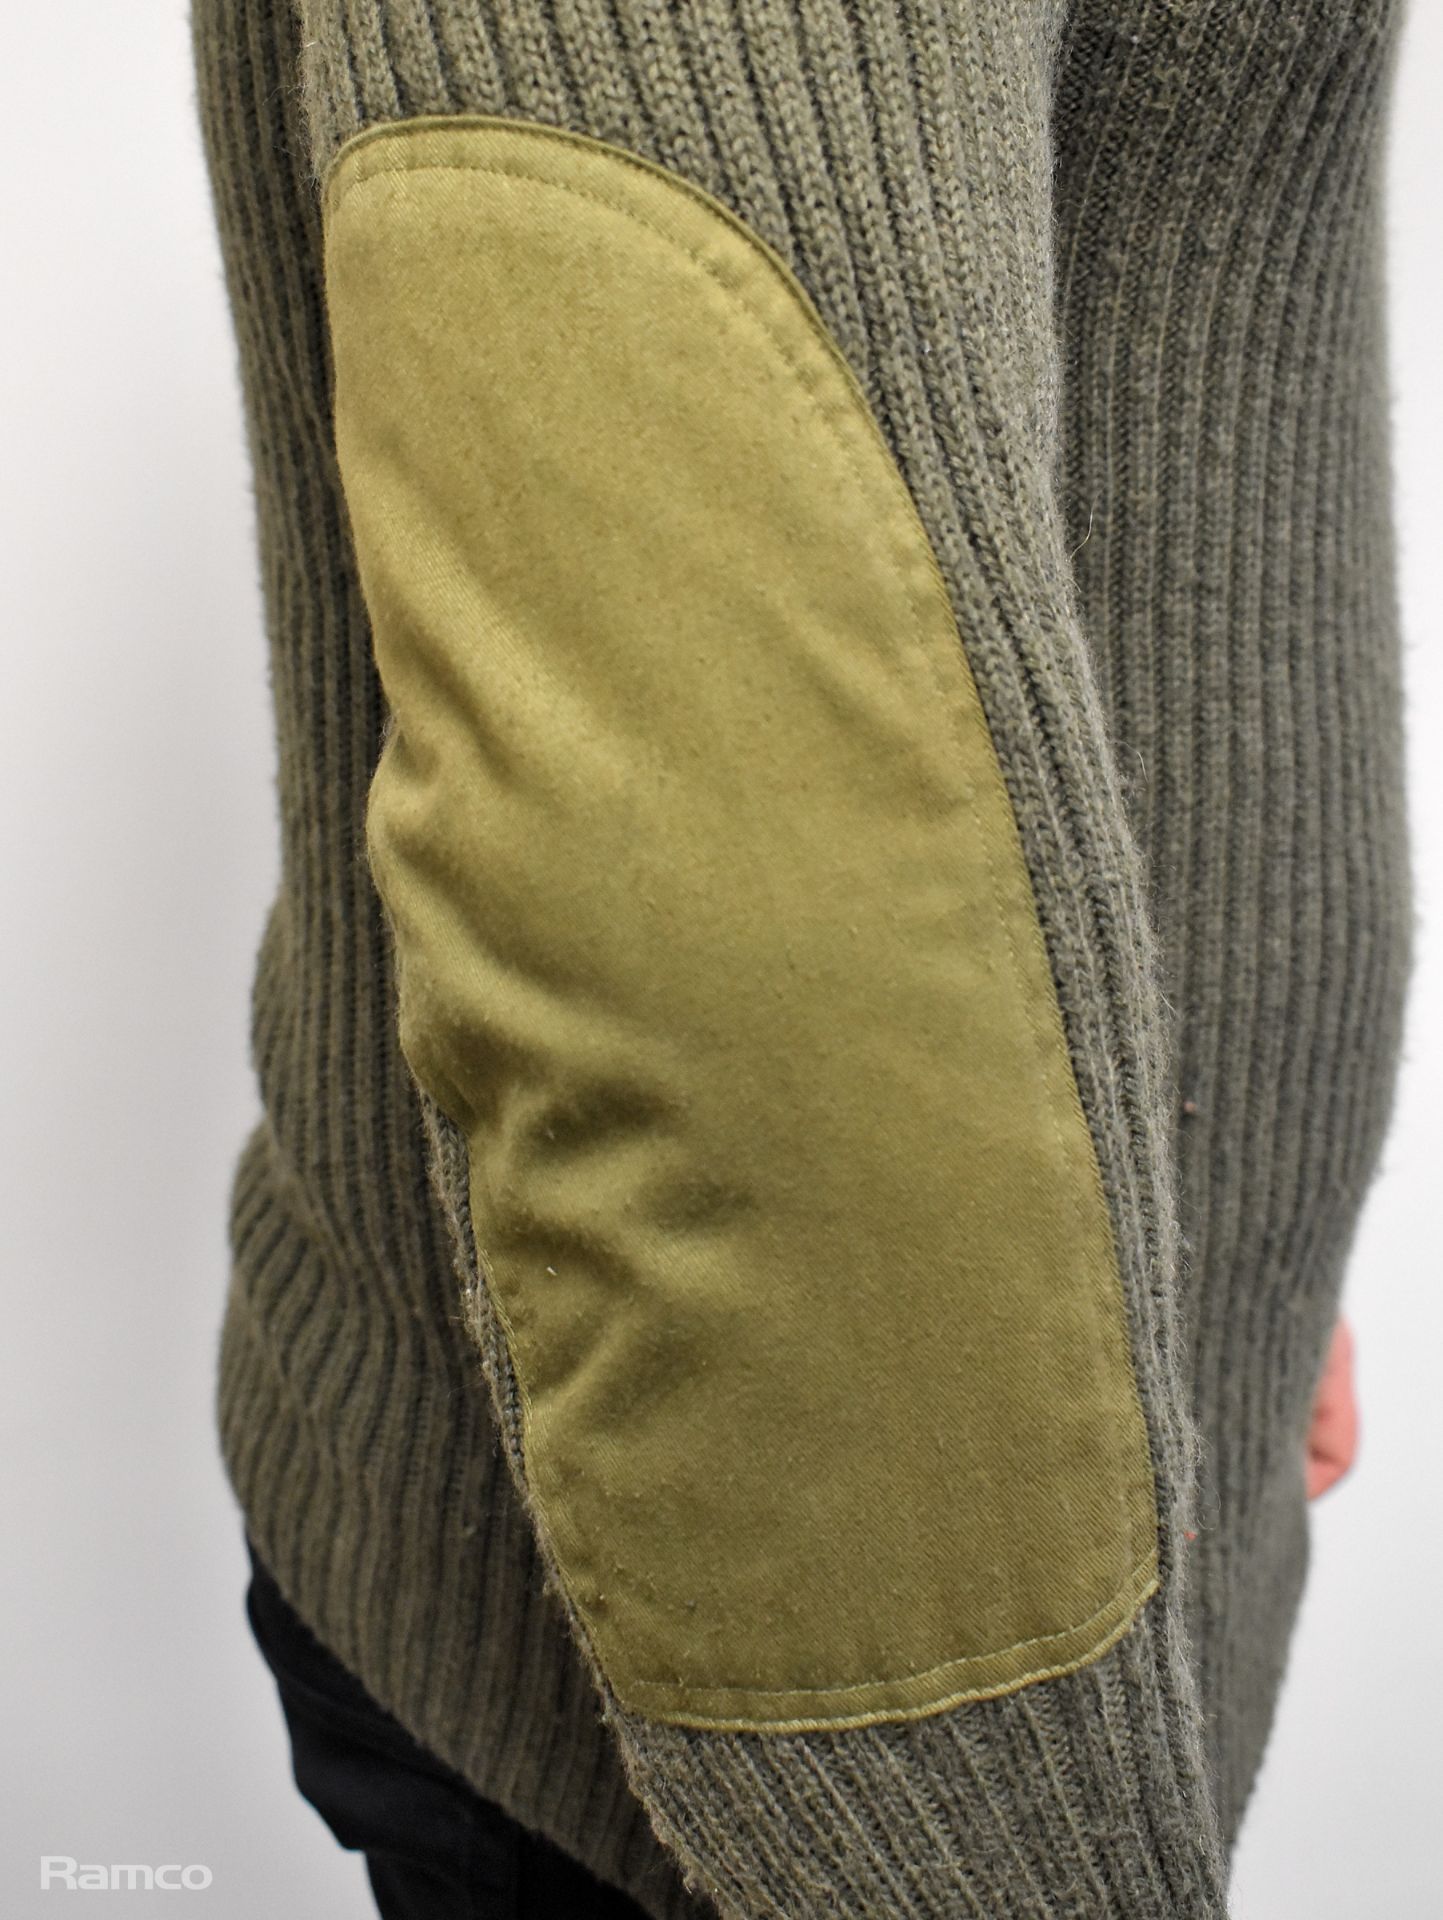 60x British Army wool jerseys - Olive - mixed grades and sizes - Image 5 of 10